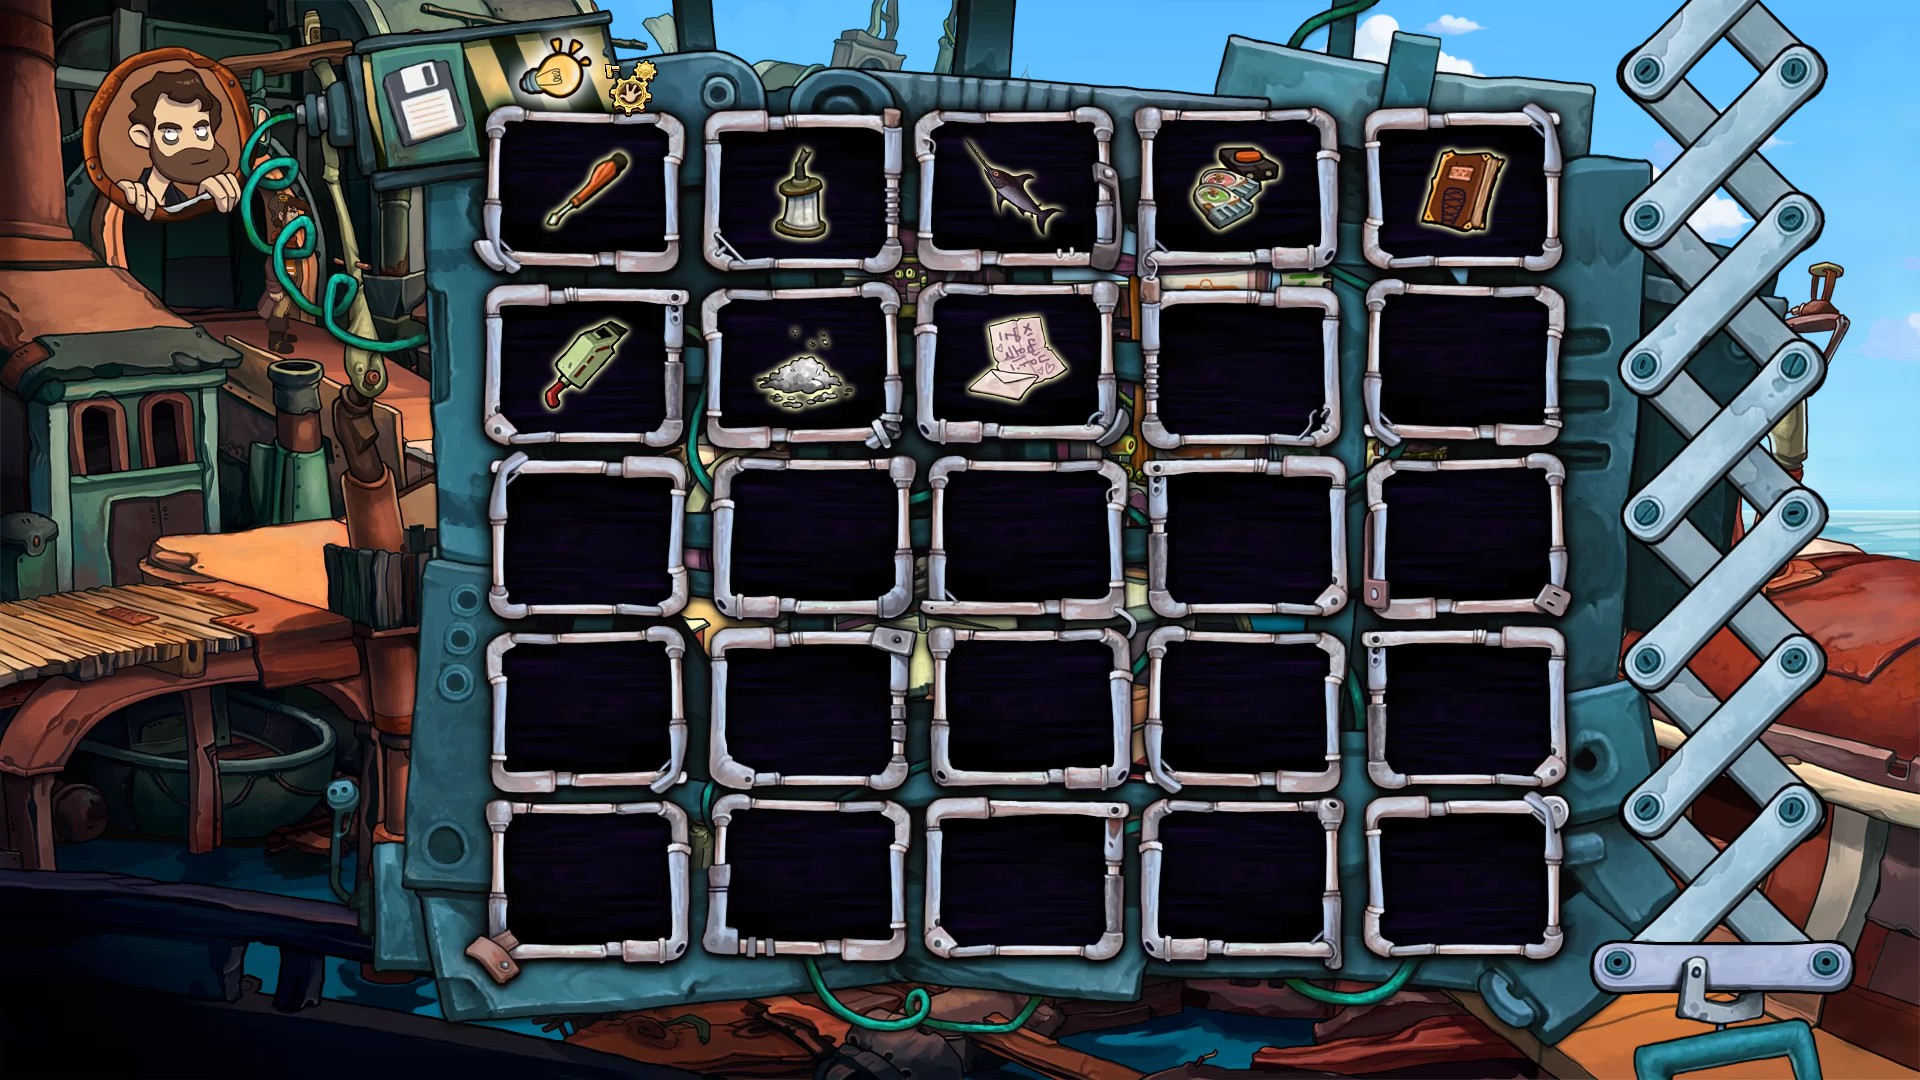 Deponia: The Complete Journey - Mini Game BUG?